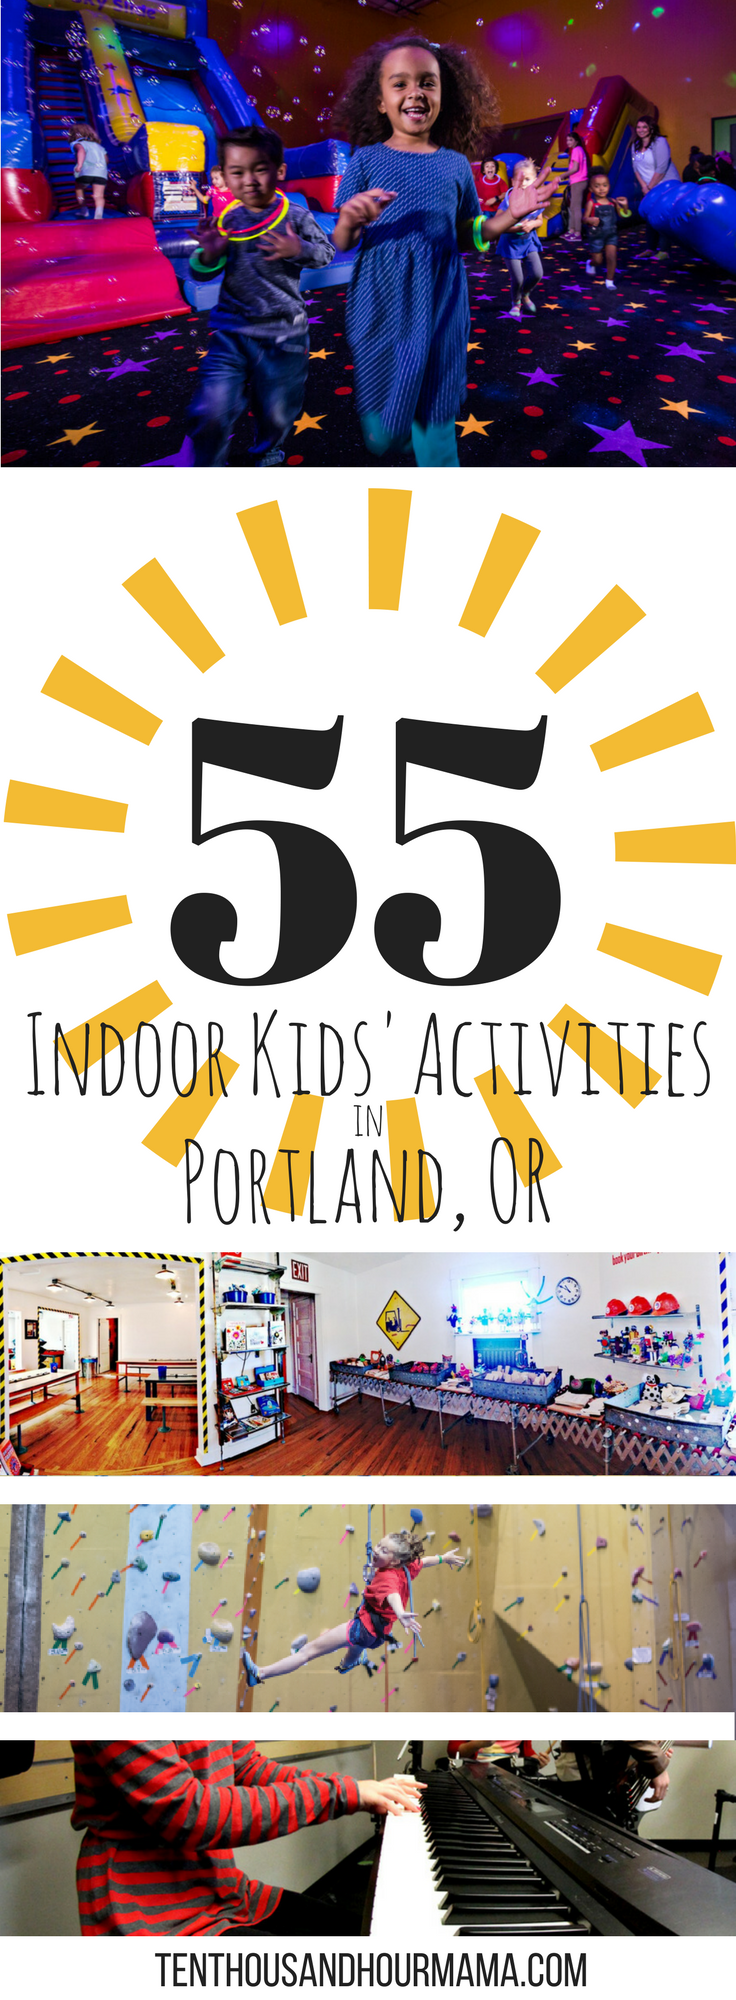 55 of the best ideas of indoor kids activities in Portland, Oregon, including restaurants, museums, play gyms, arts and crafts studios and more! Ten Thousand Hour Mama